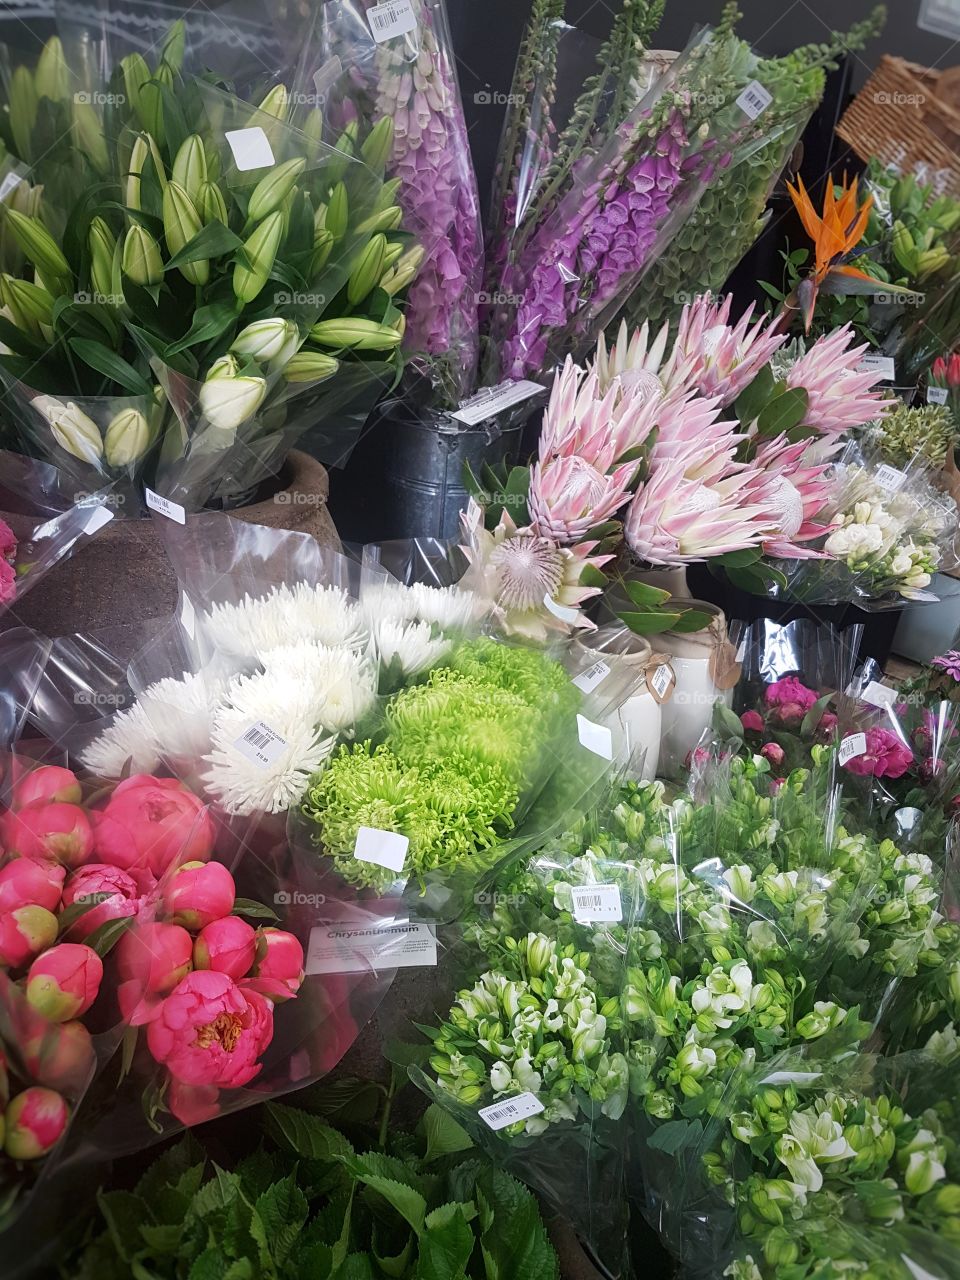 Fresh Bunches of Flowers at market stall pretty